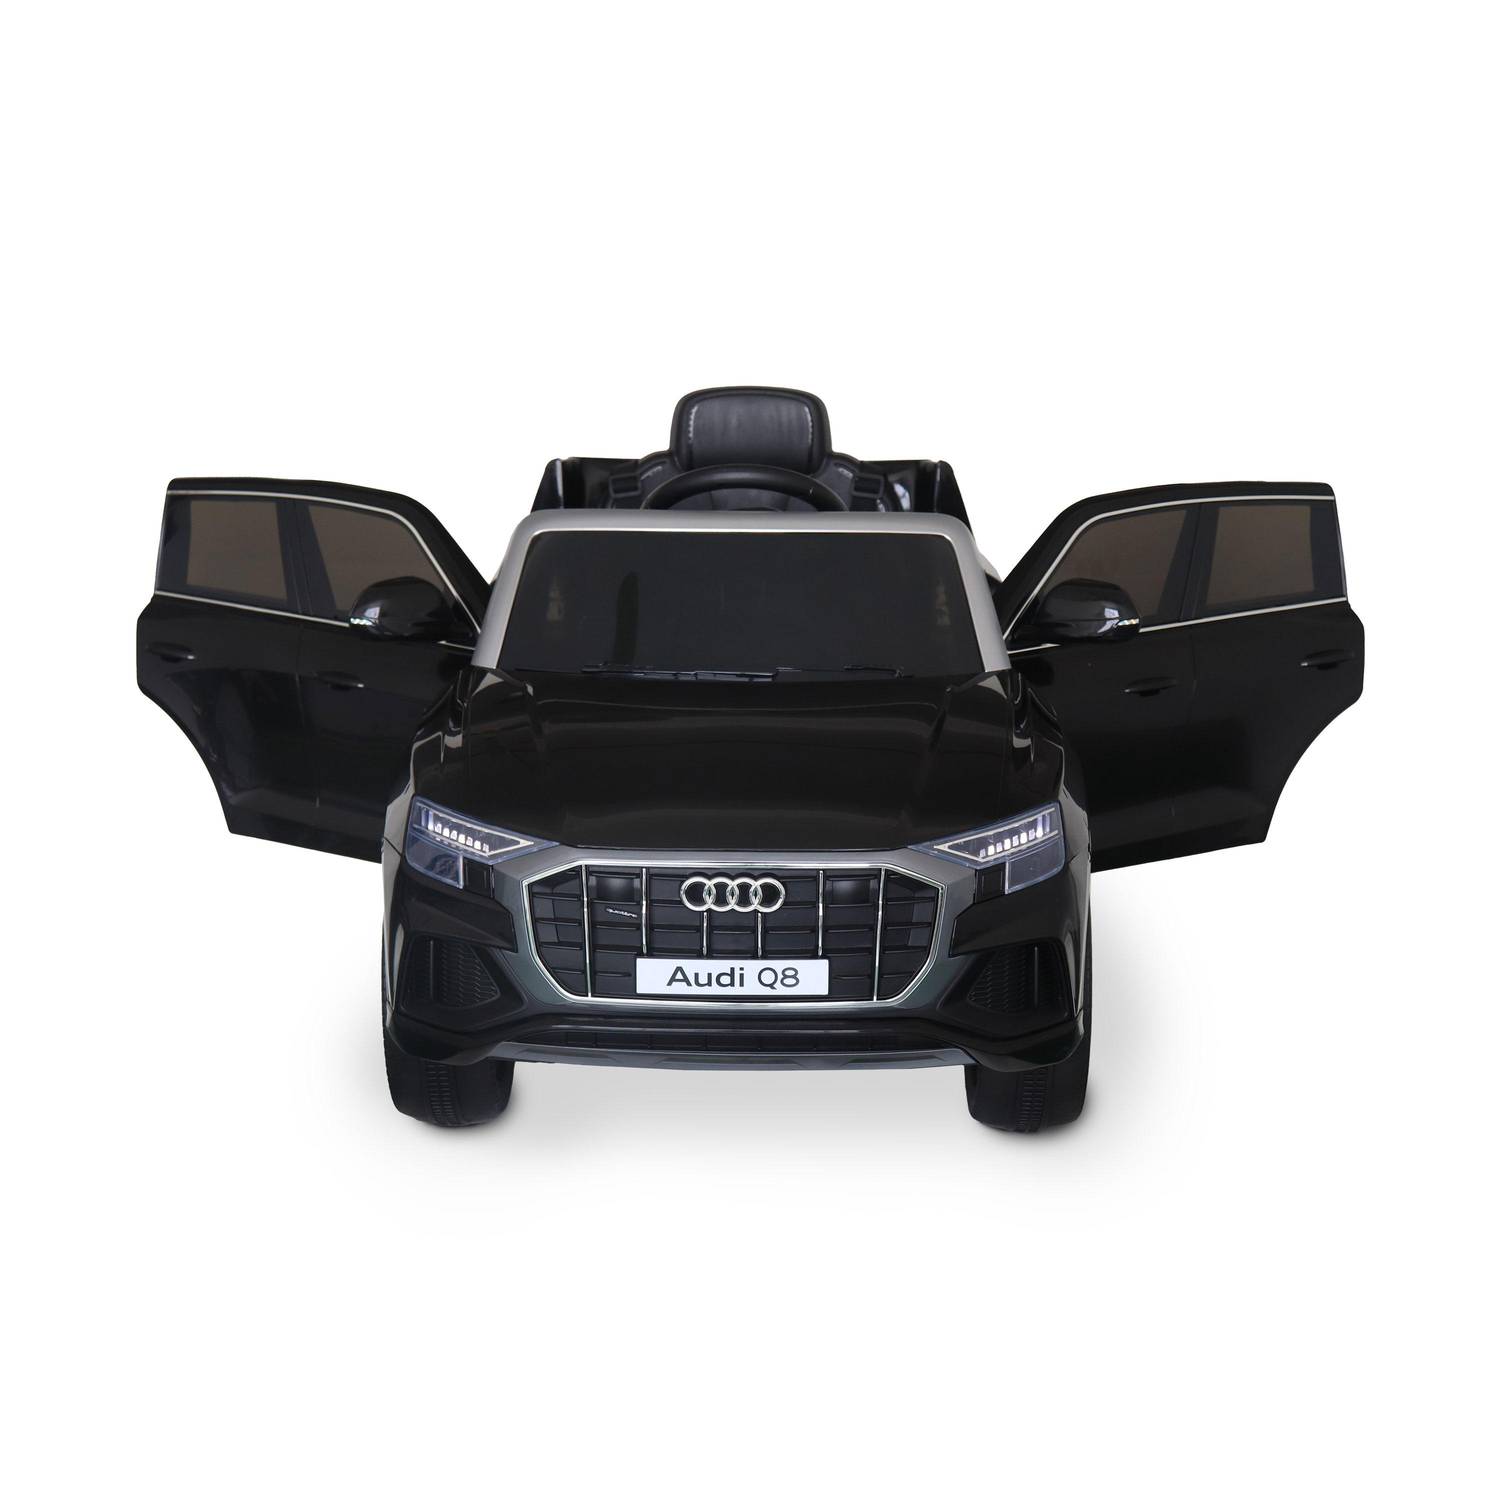 Children's electric car 12V, 1 seat with car radio and remote control - AUDI Q8 - Black Photo2